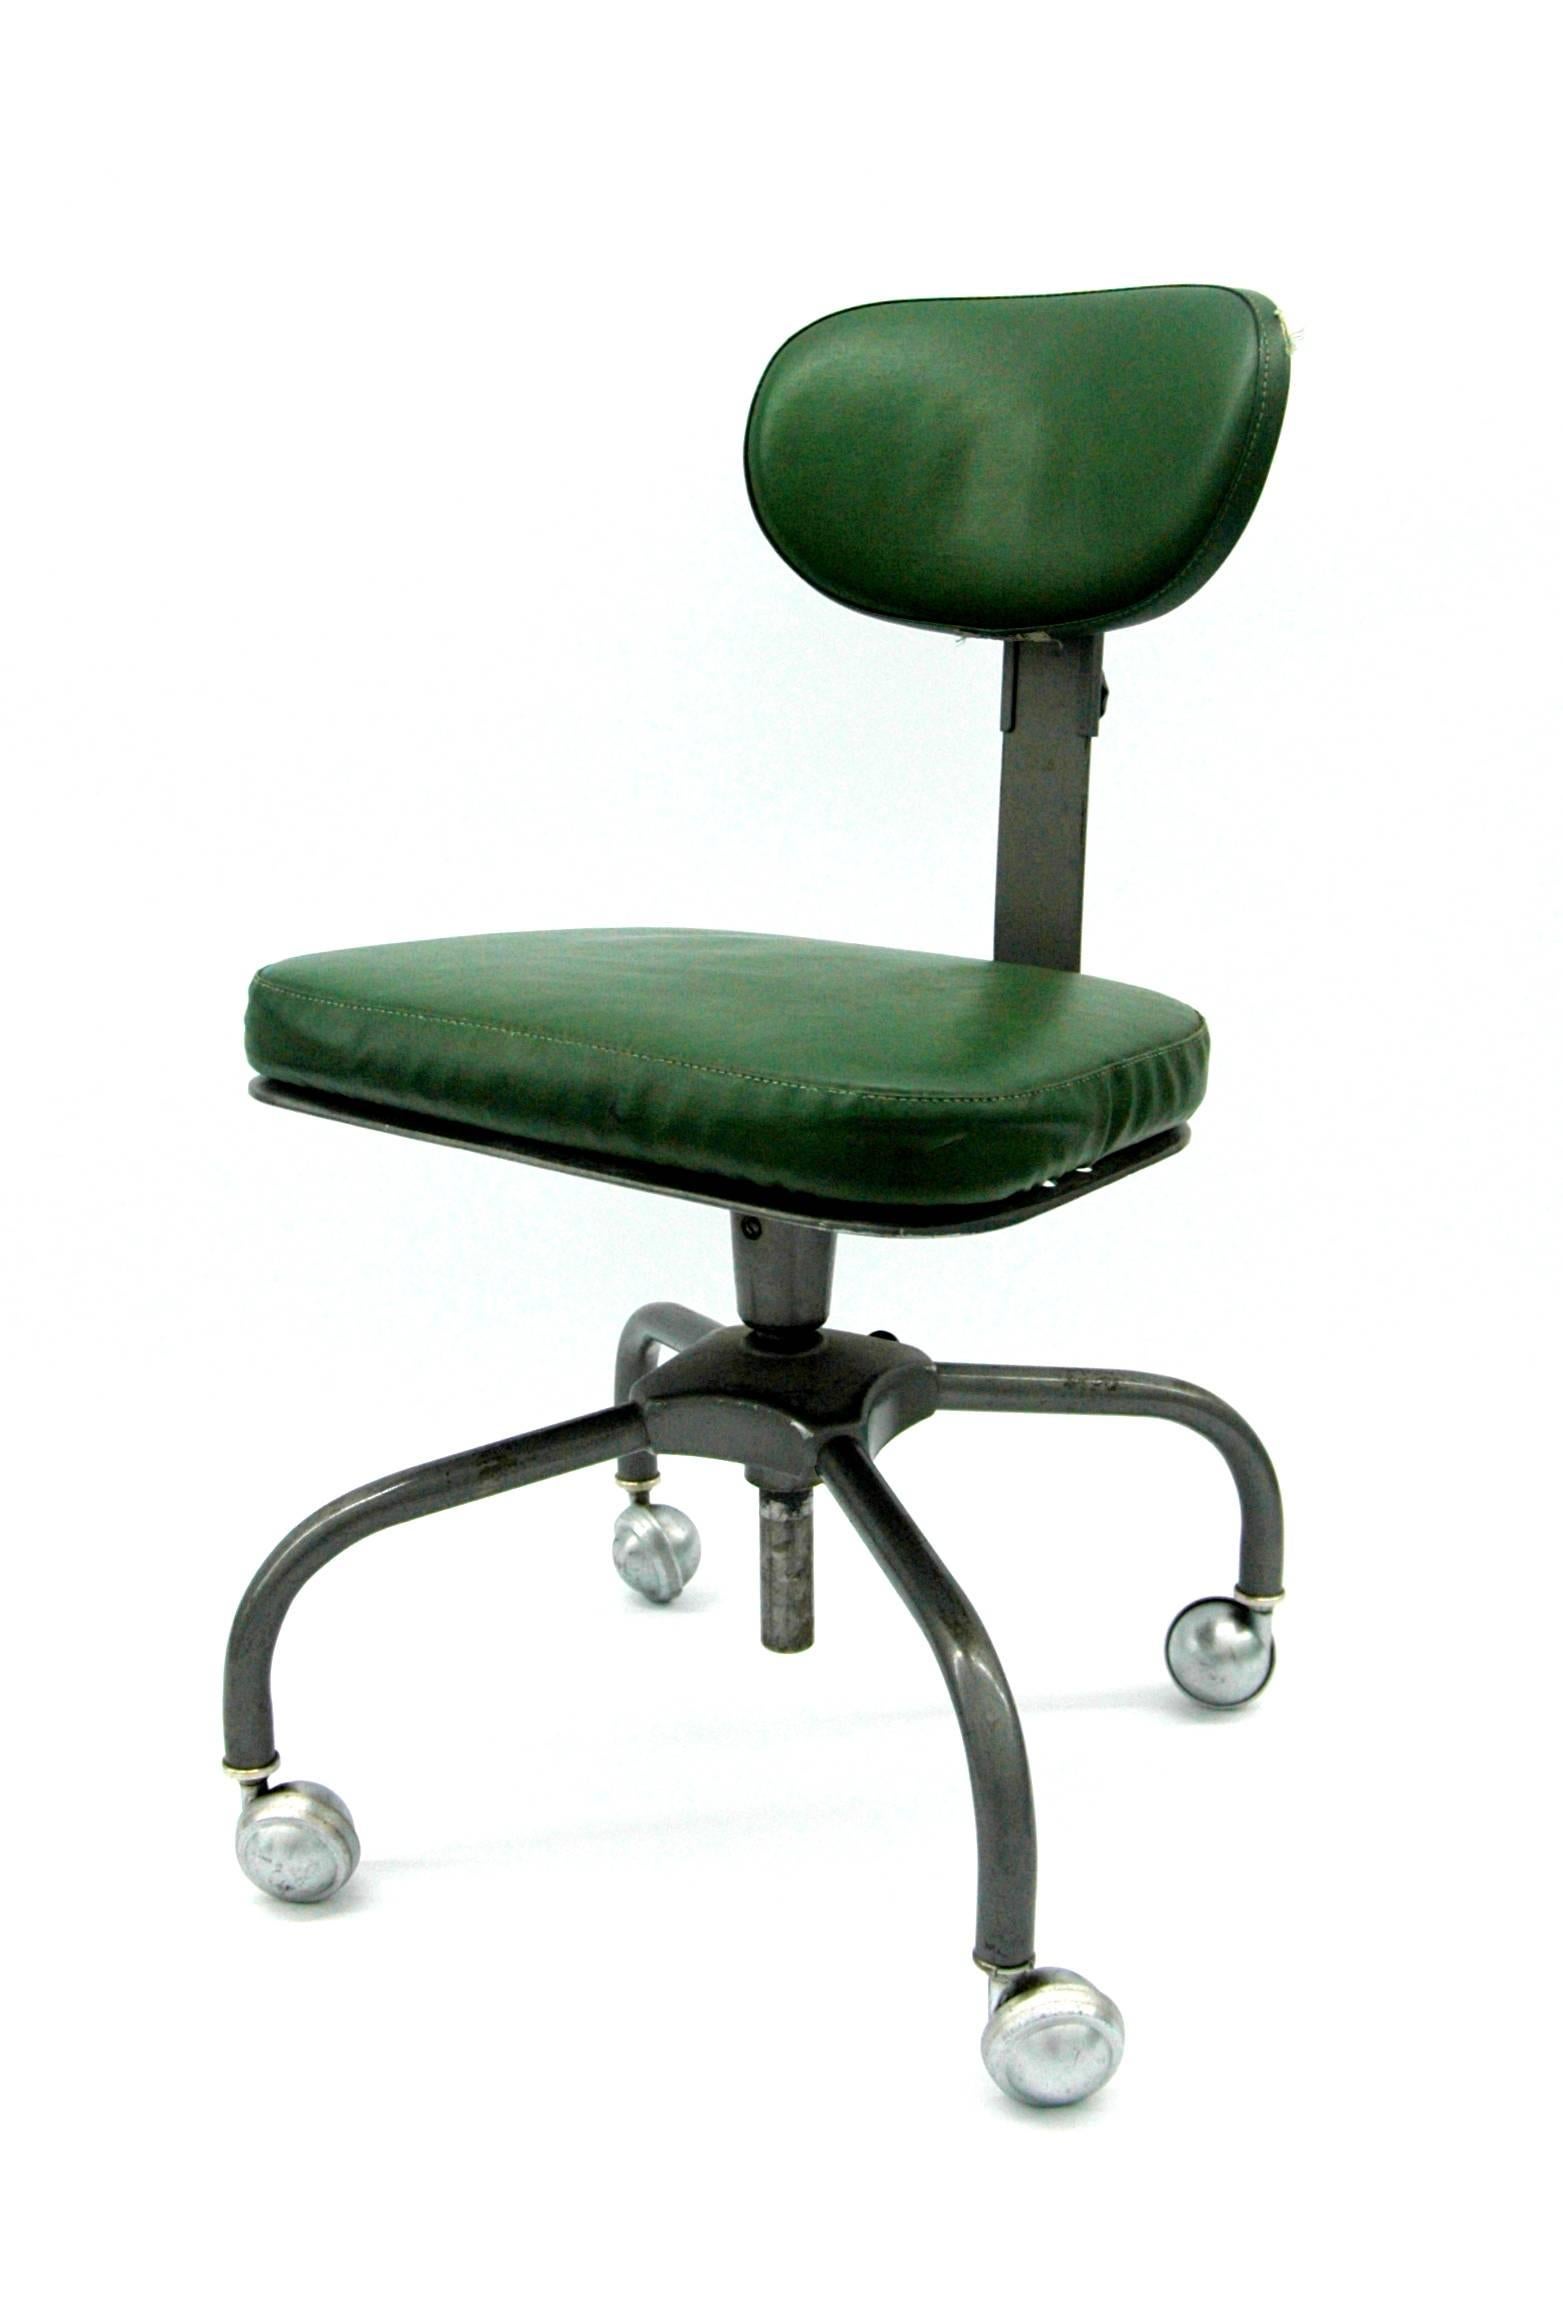 A streamlined desk chair on casters by the Cramer Company of Kansas City, Kansas. 

The Air-Flow label was trademarked in 1958.